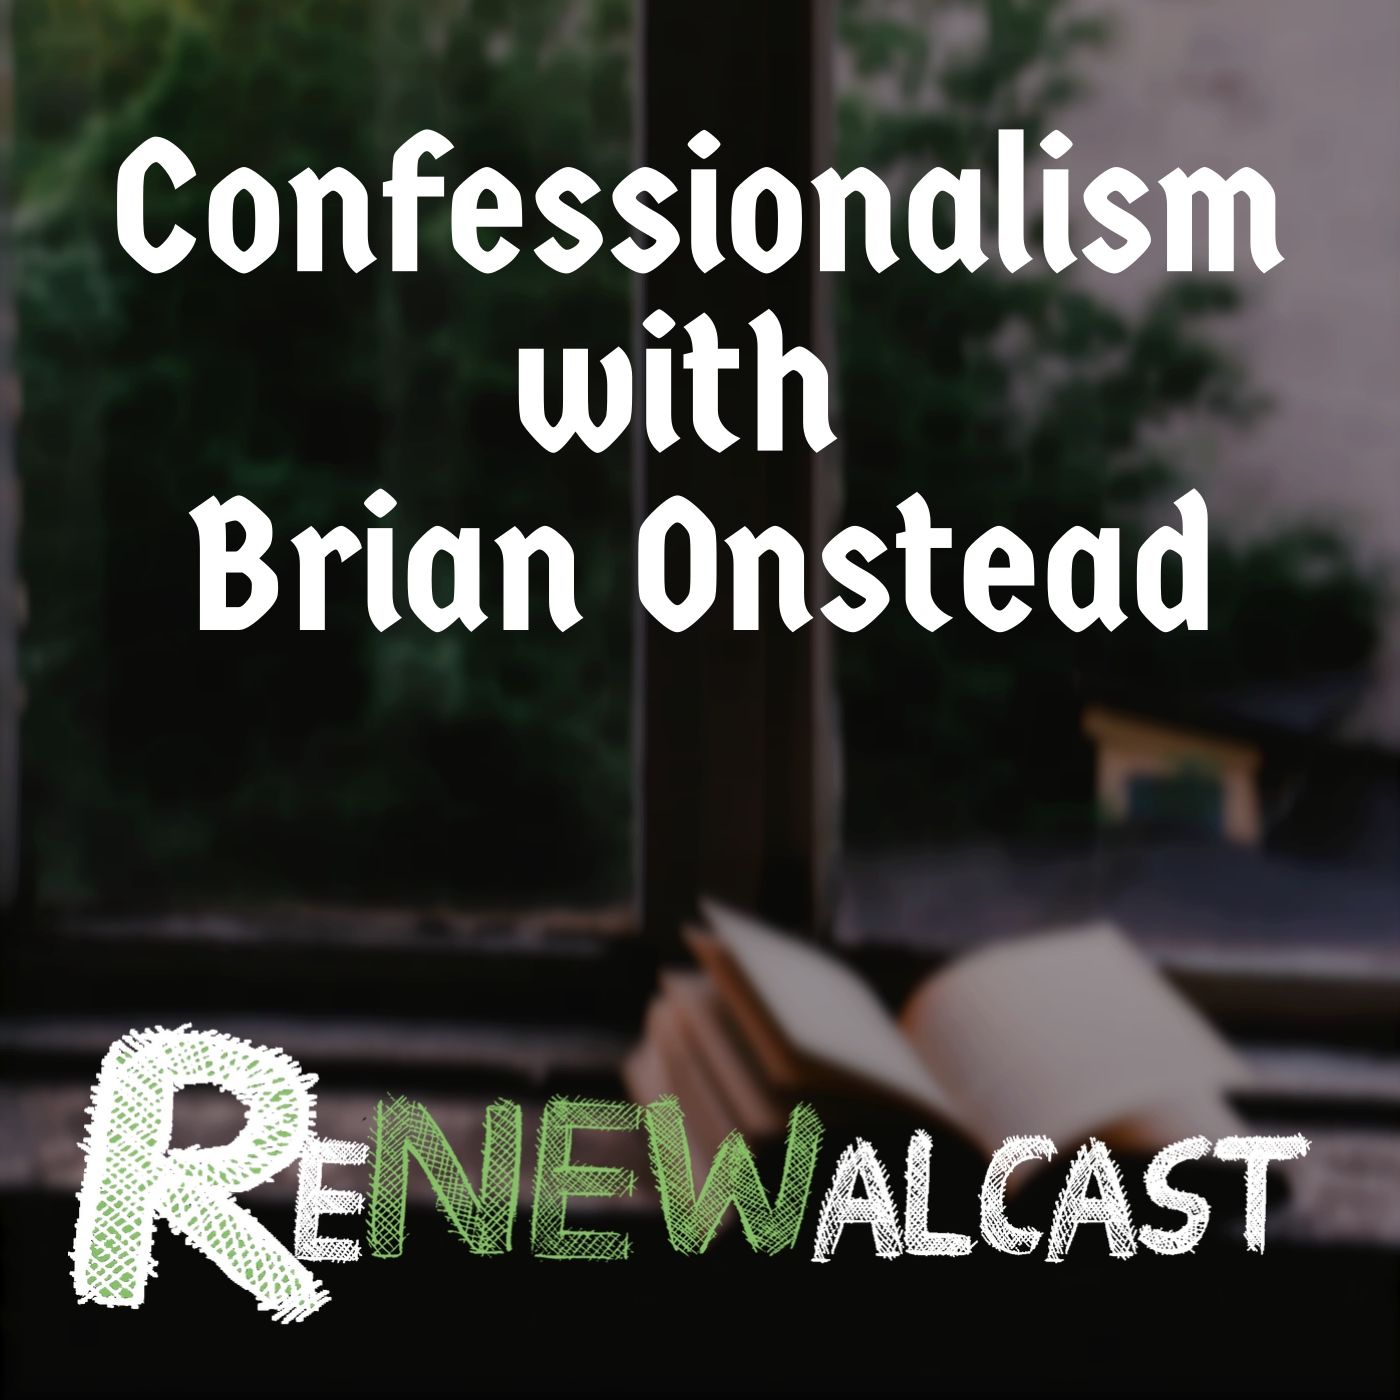 Confessionalism with Brian Onstead